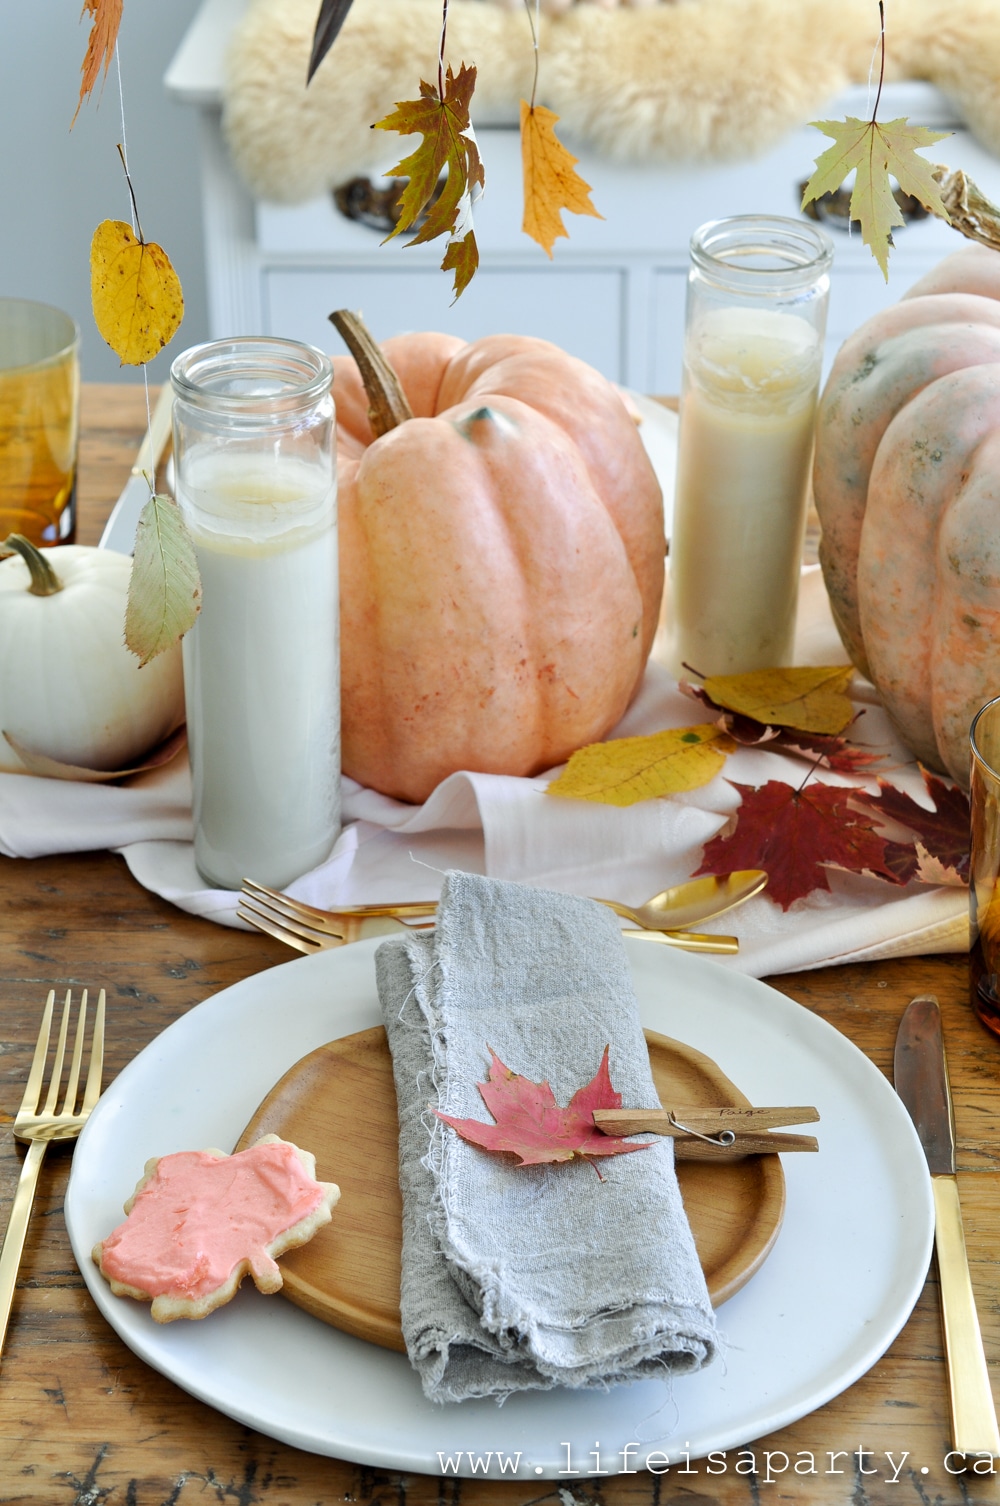 Fall Leaf Thanksgiving Table: Hanging pressed fall leaves, and pink heirloom pumpkins, ombre leaf cookies, and cloths pin place cards make a beautiful table.